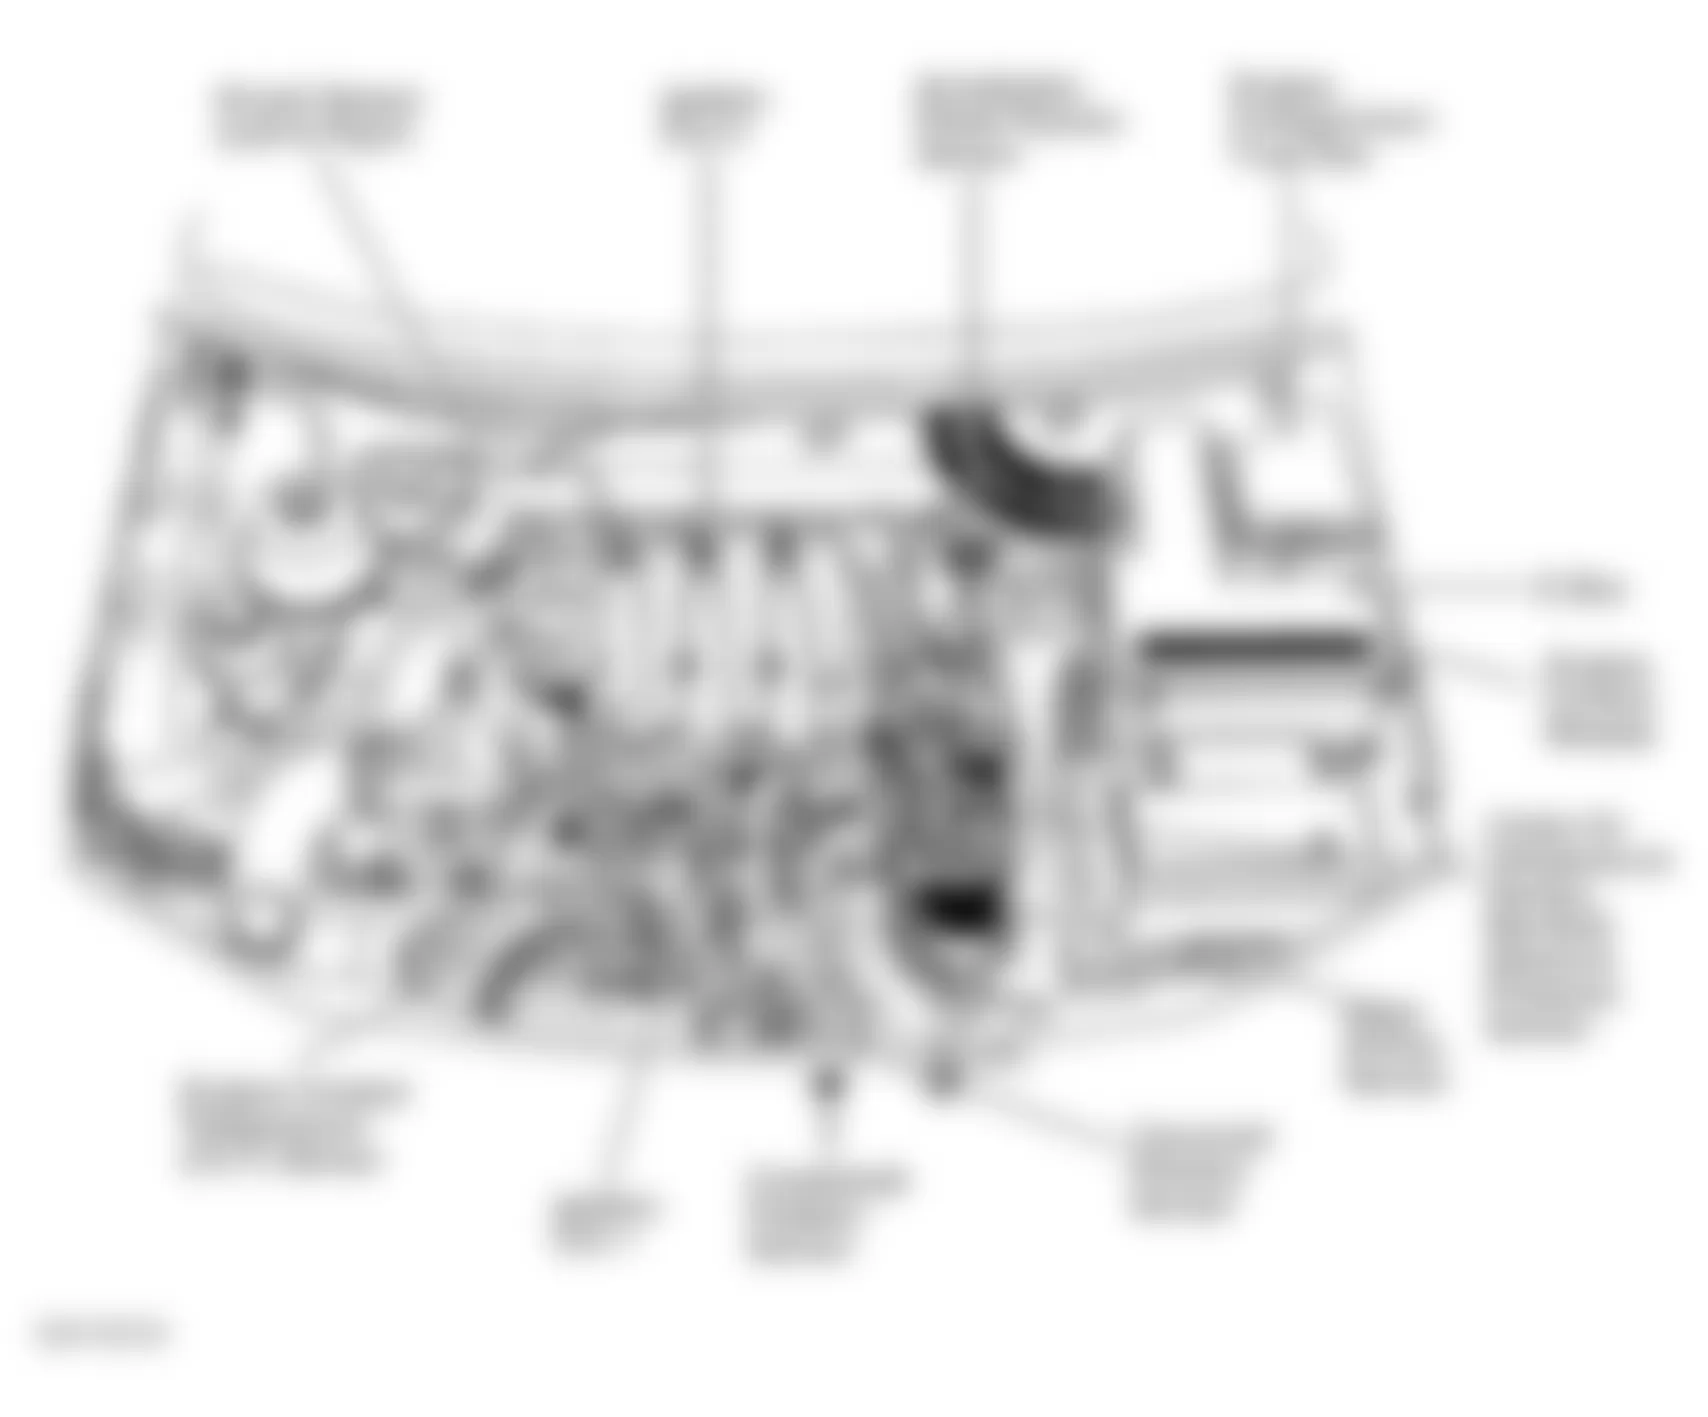 Land Rover Freelander HSE 2003 - Component Locations -  Engine Compartment